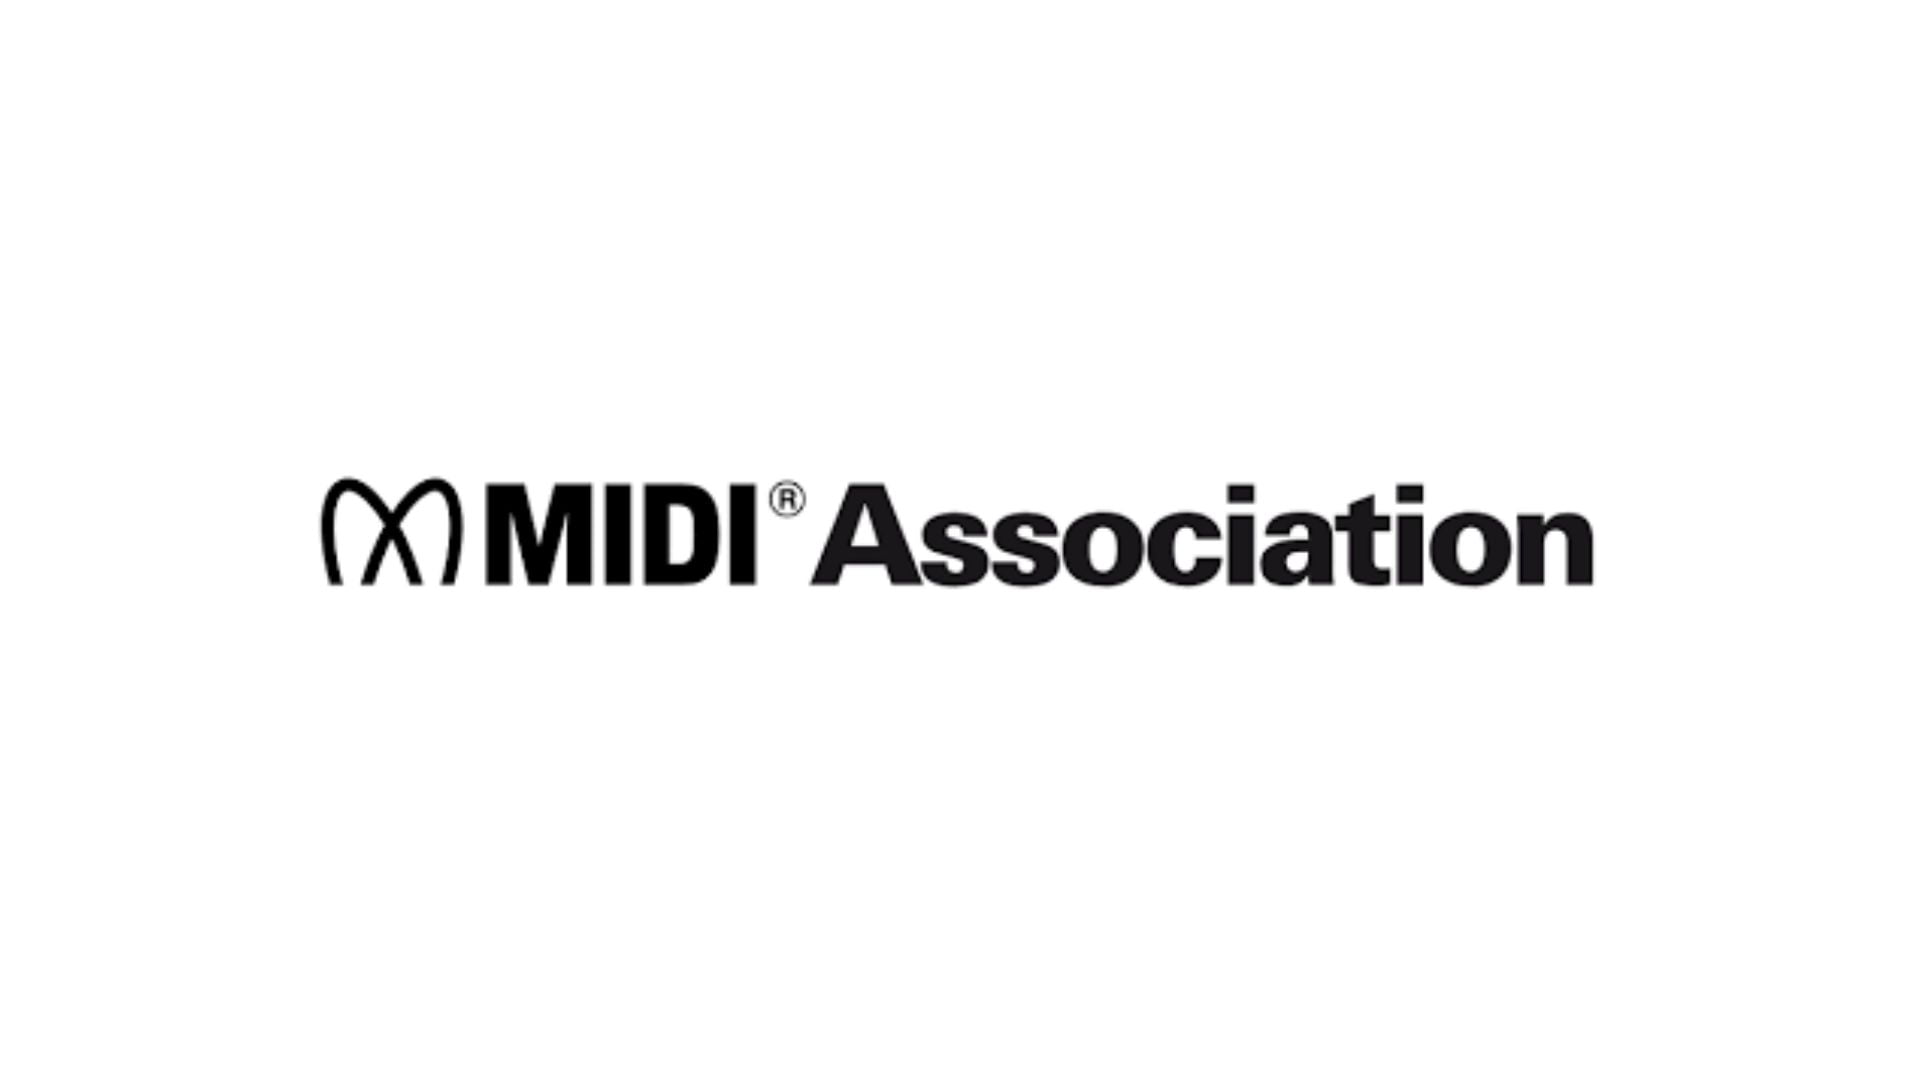 Focusrite Group’s Tim Carroll appointed president at MIDI Association